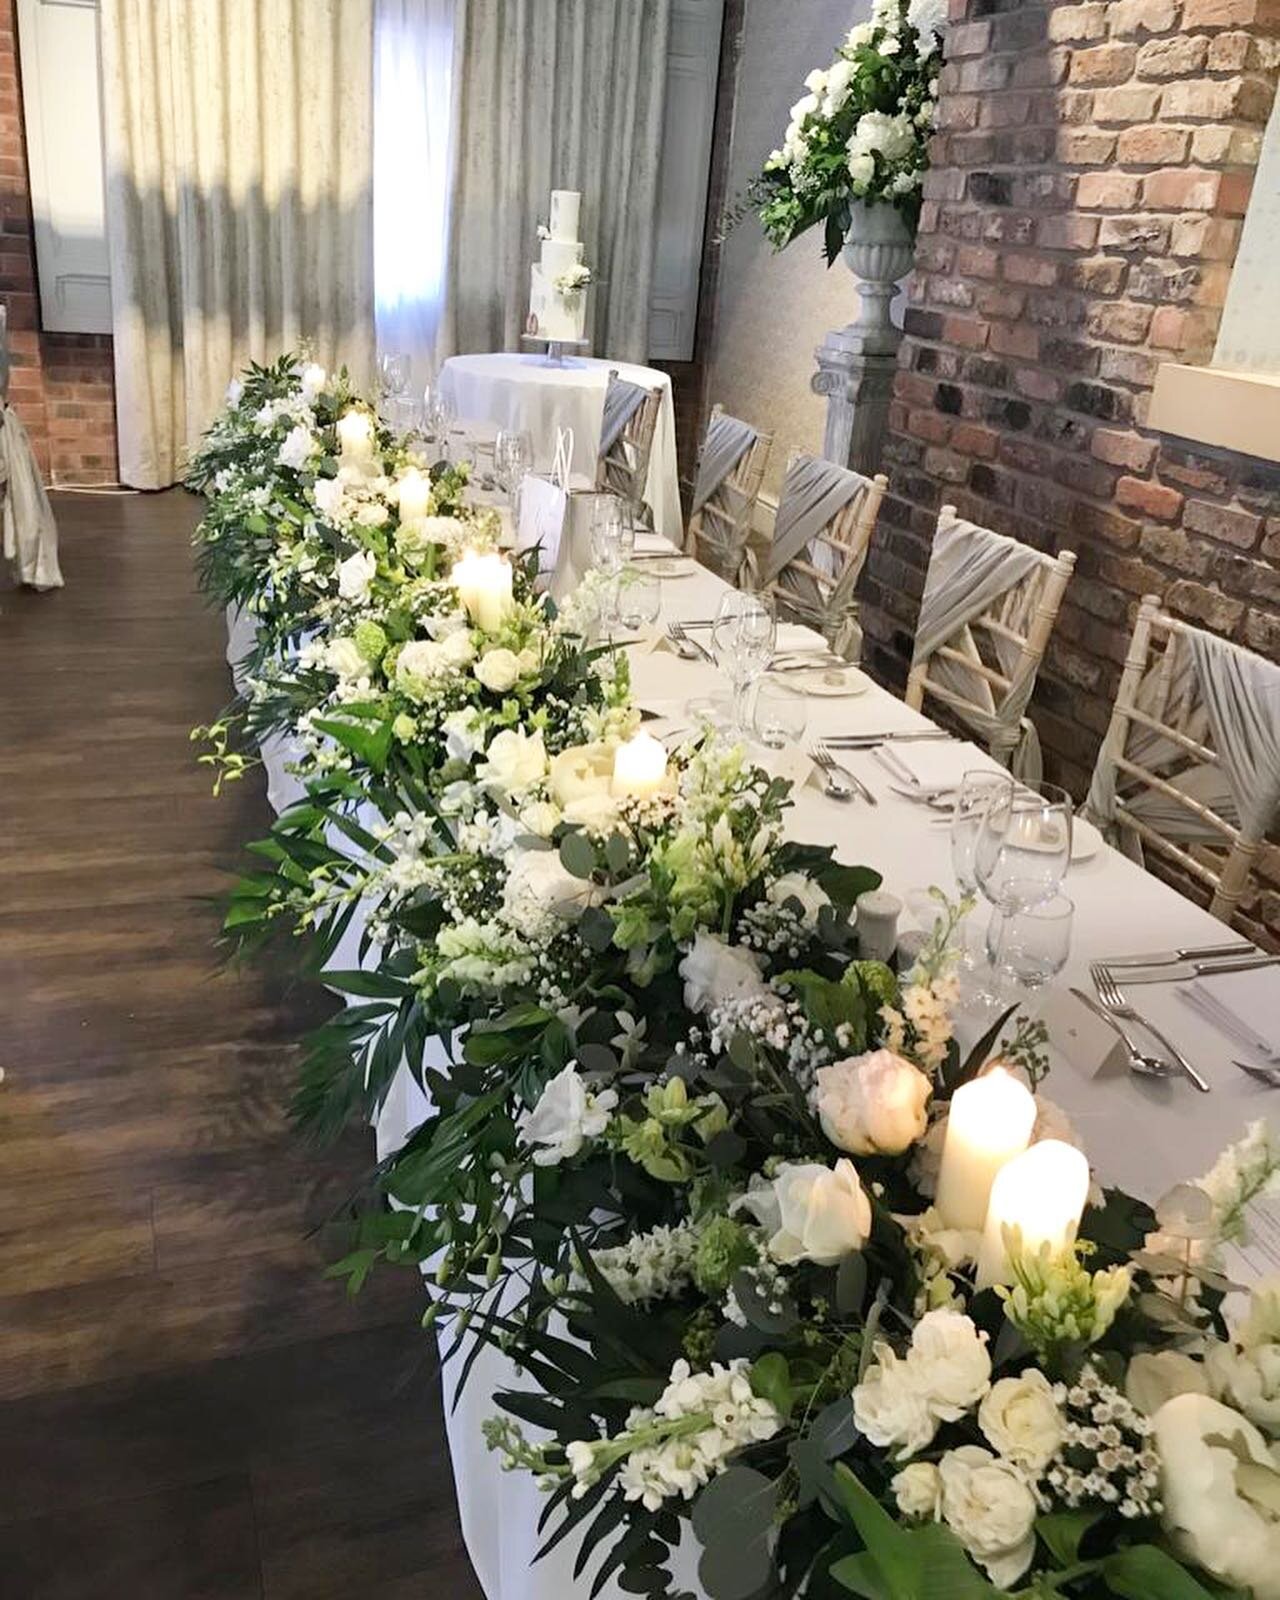 Beautiful Top Table Design for Eleanor &amp; Alex&rsquo;s wedding reception, fresh fragrant Roses, Peonies, Agapanthus, Campanulas , Stocks, Larkspur, Hydrangeas and so much more dressed the front of the table perfectly over at @bartlehallhotel #topt